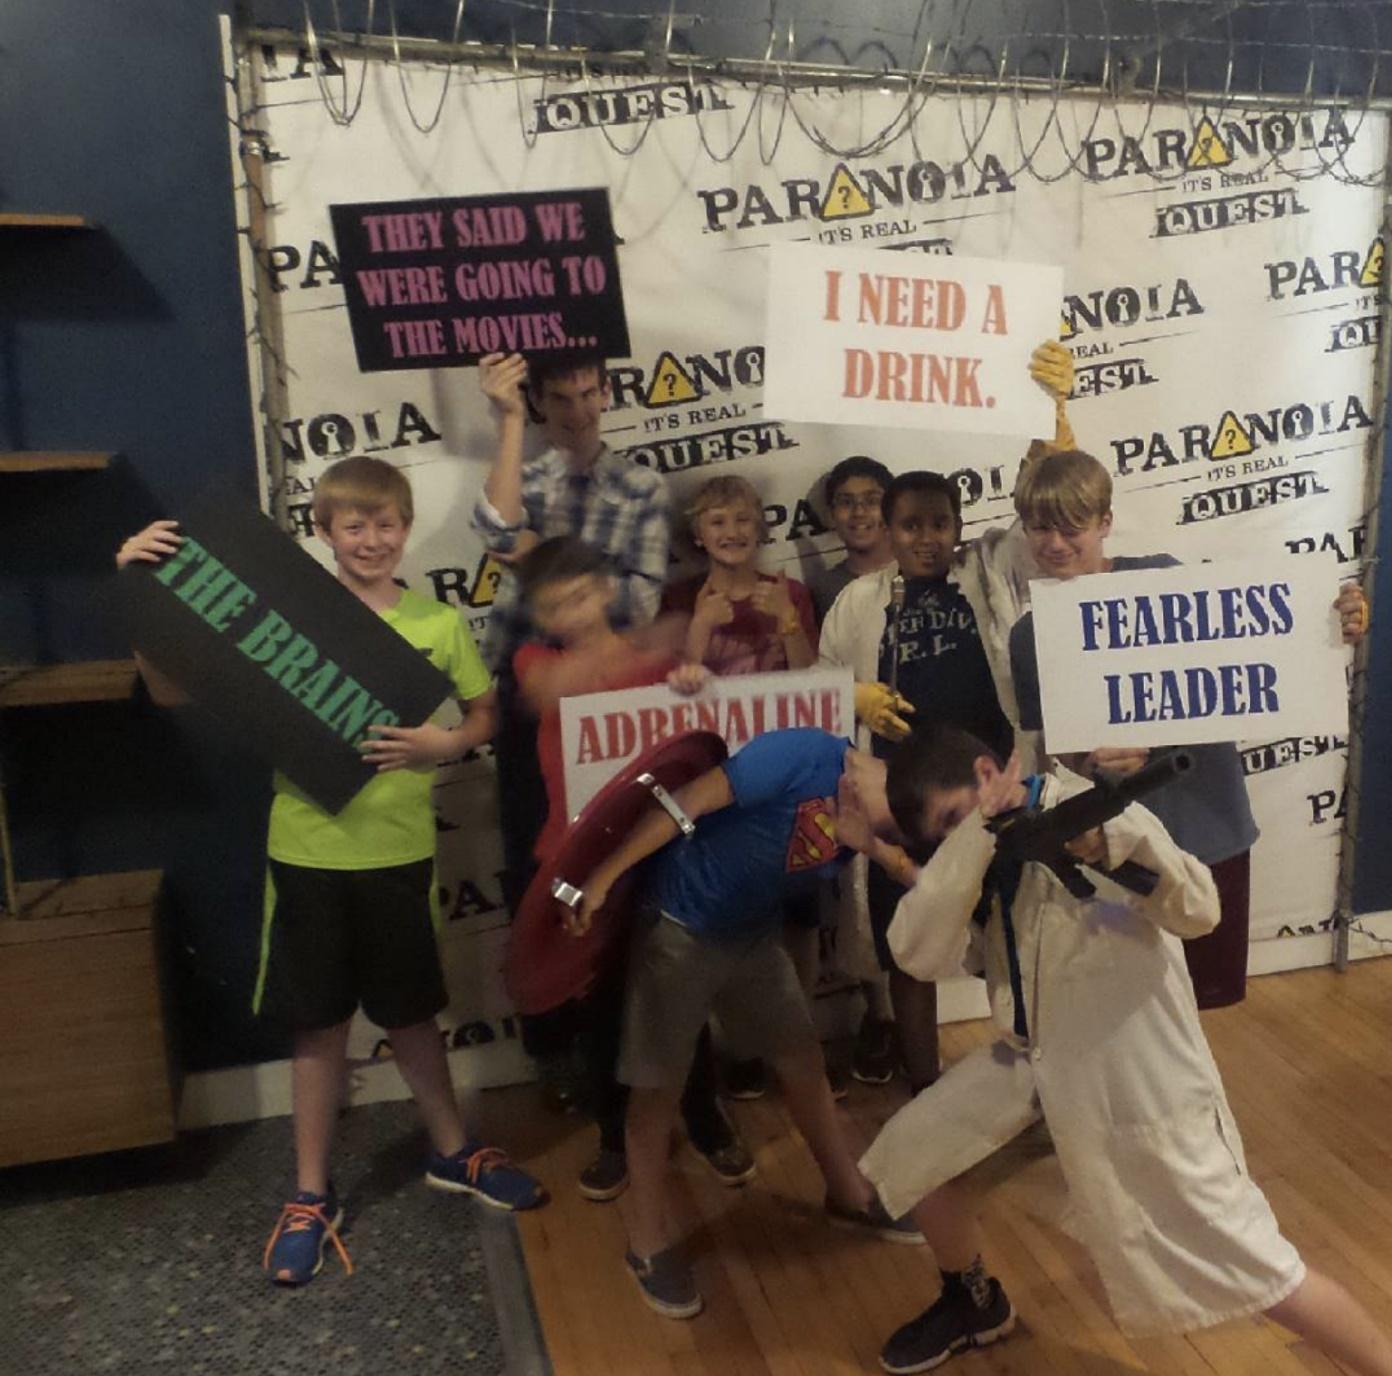 The picture shows a group of kids dressed up for escape rooms and flaunting their roles.